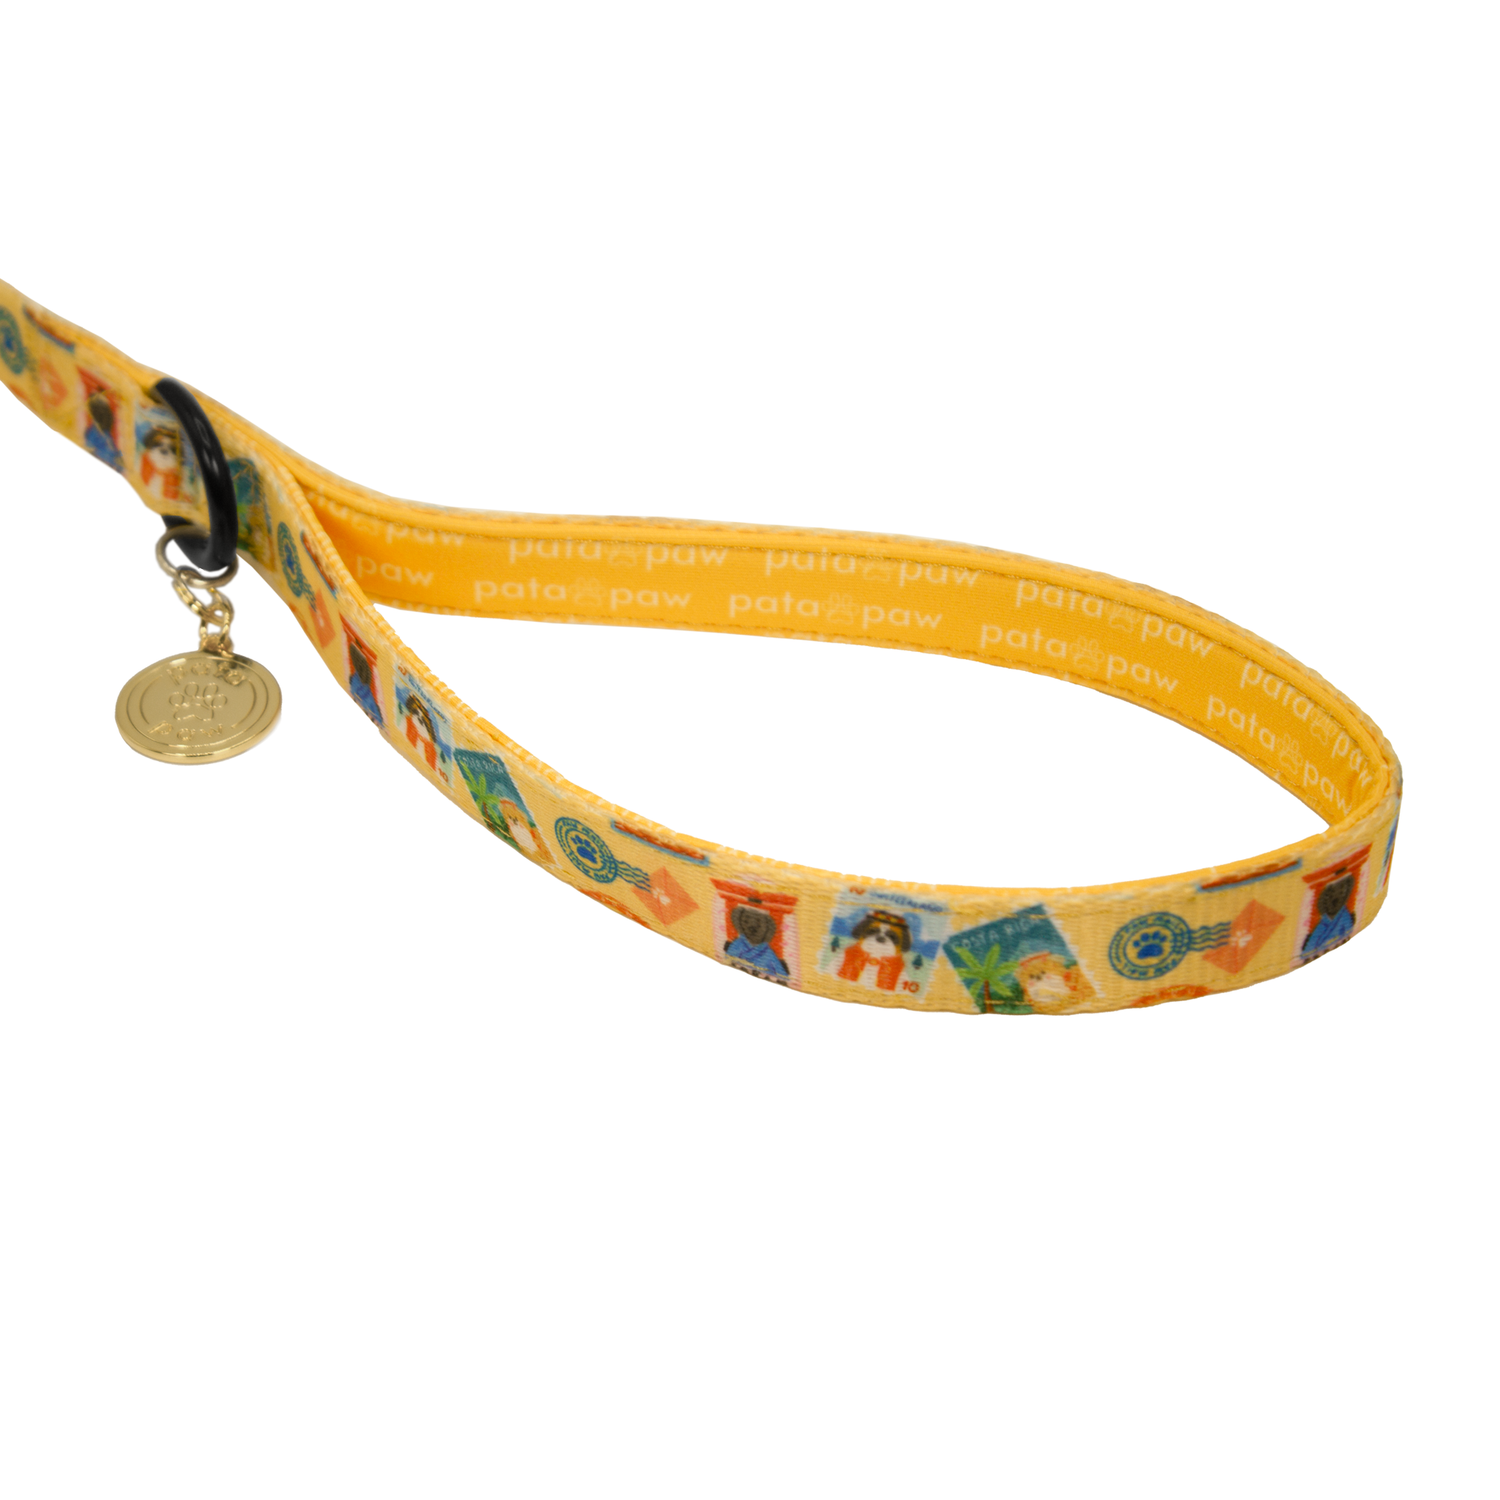 pata paw traveling pups leash showing signature handle, metallic ring to attach a poop bag holder and golden paw medal